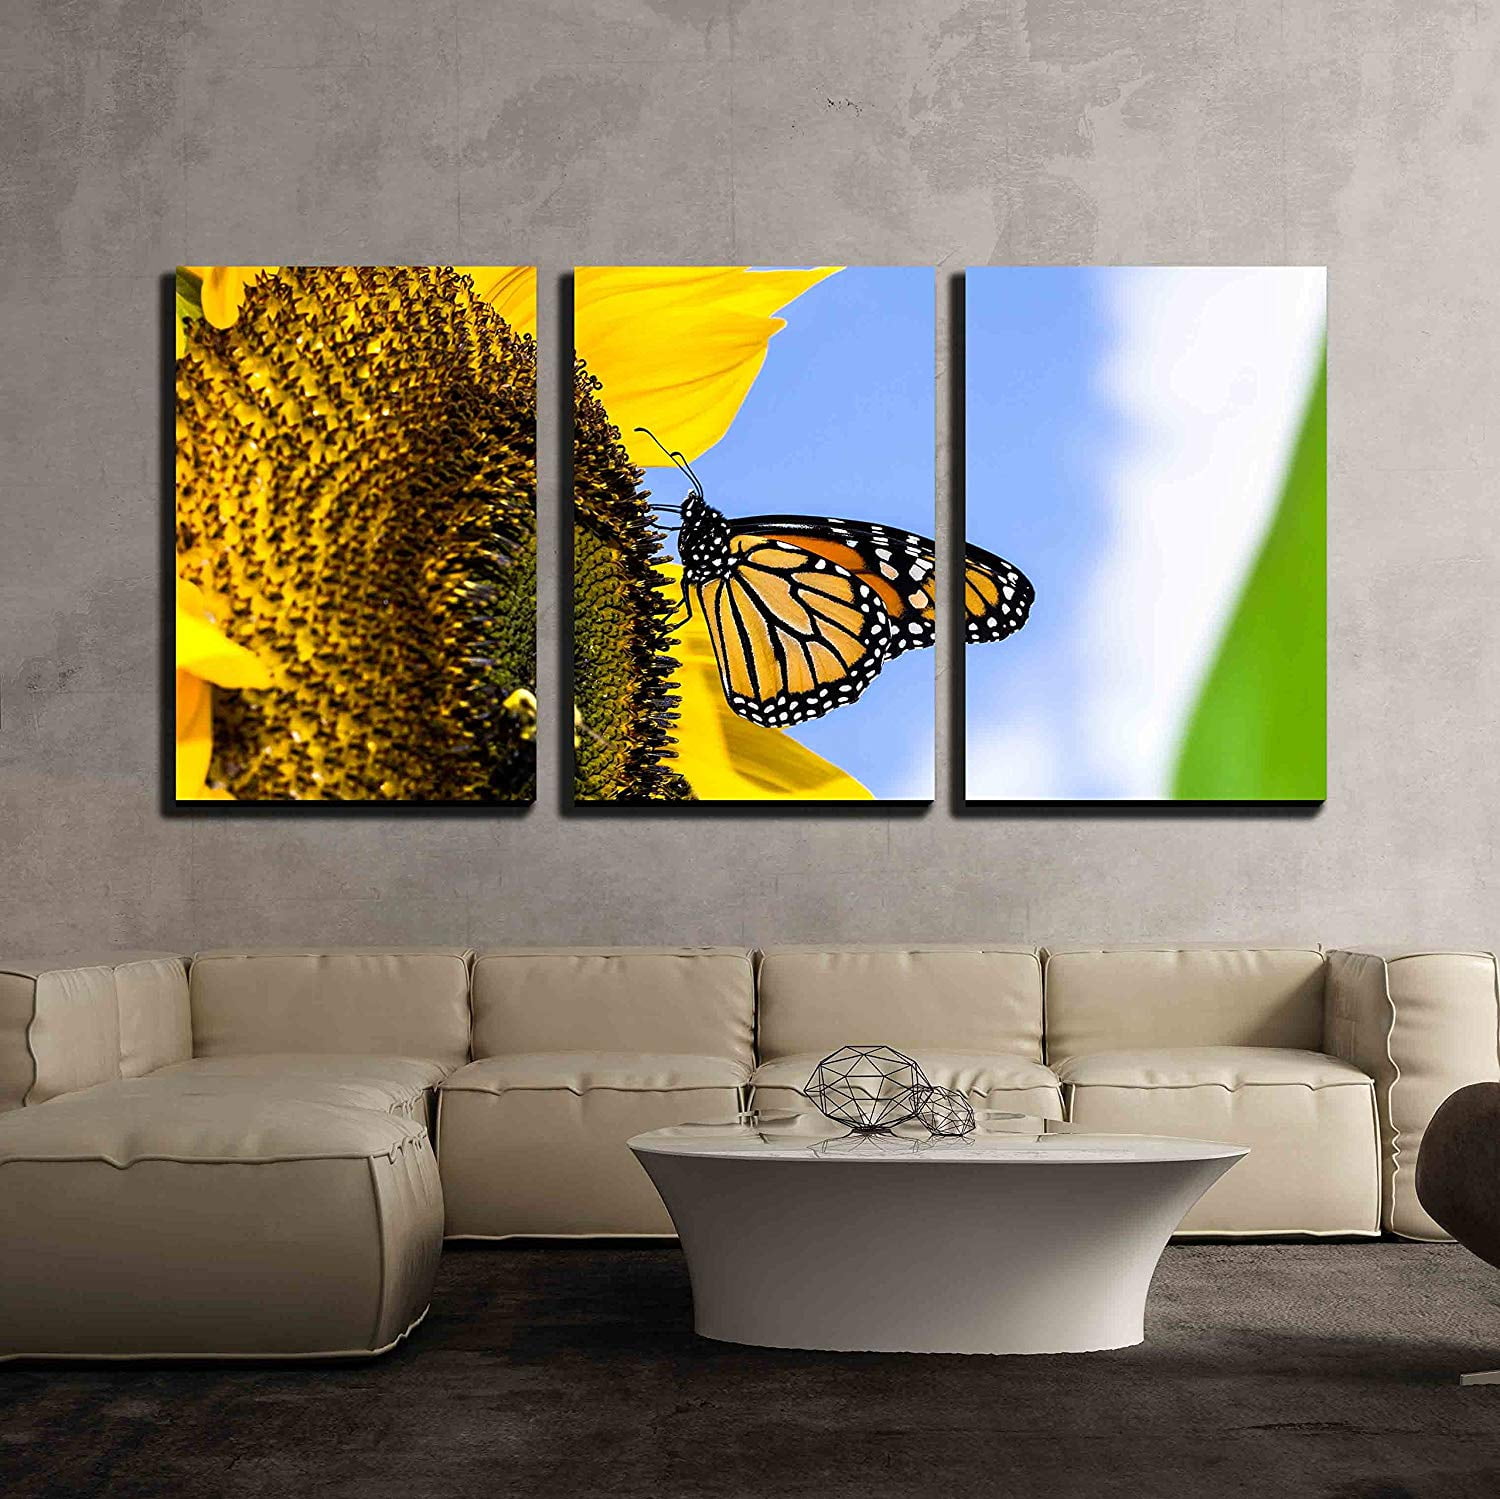 Butterfly Monarch Home Decor Grey & Color Photo Picture 8x10 Bathroom Wall Art 